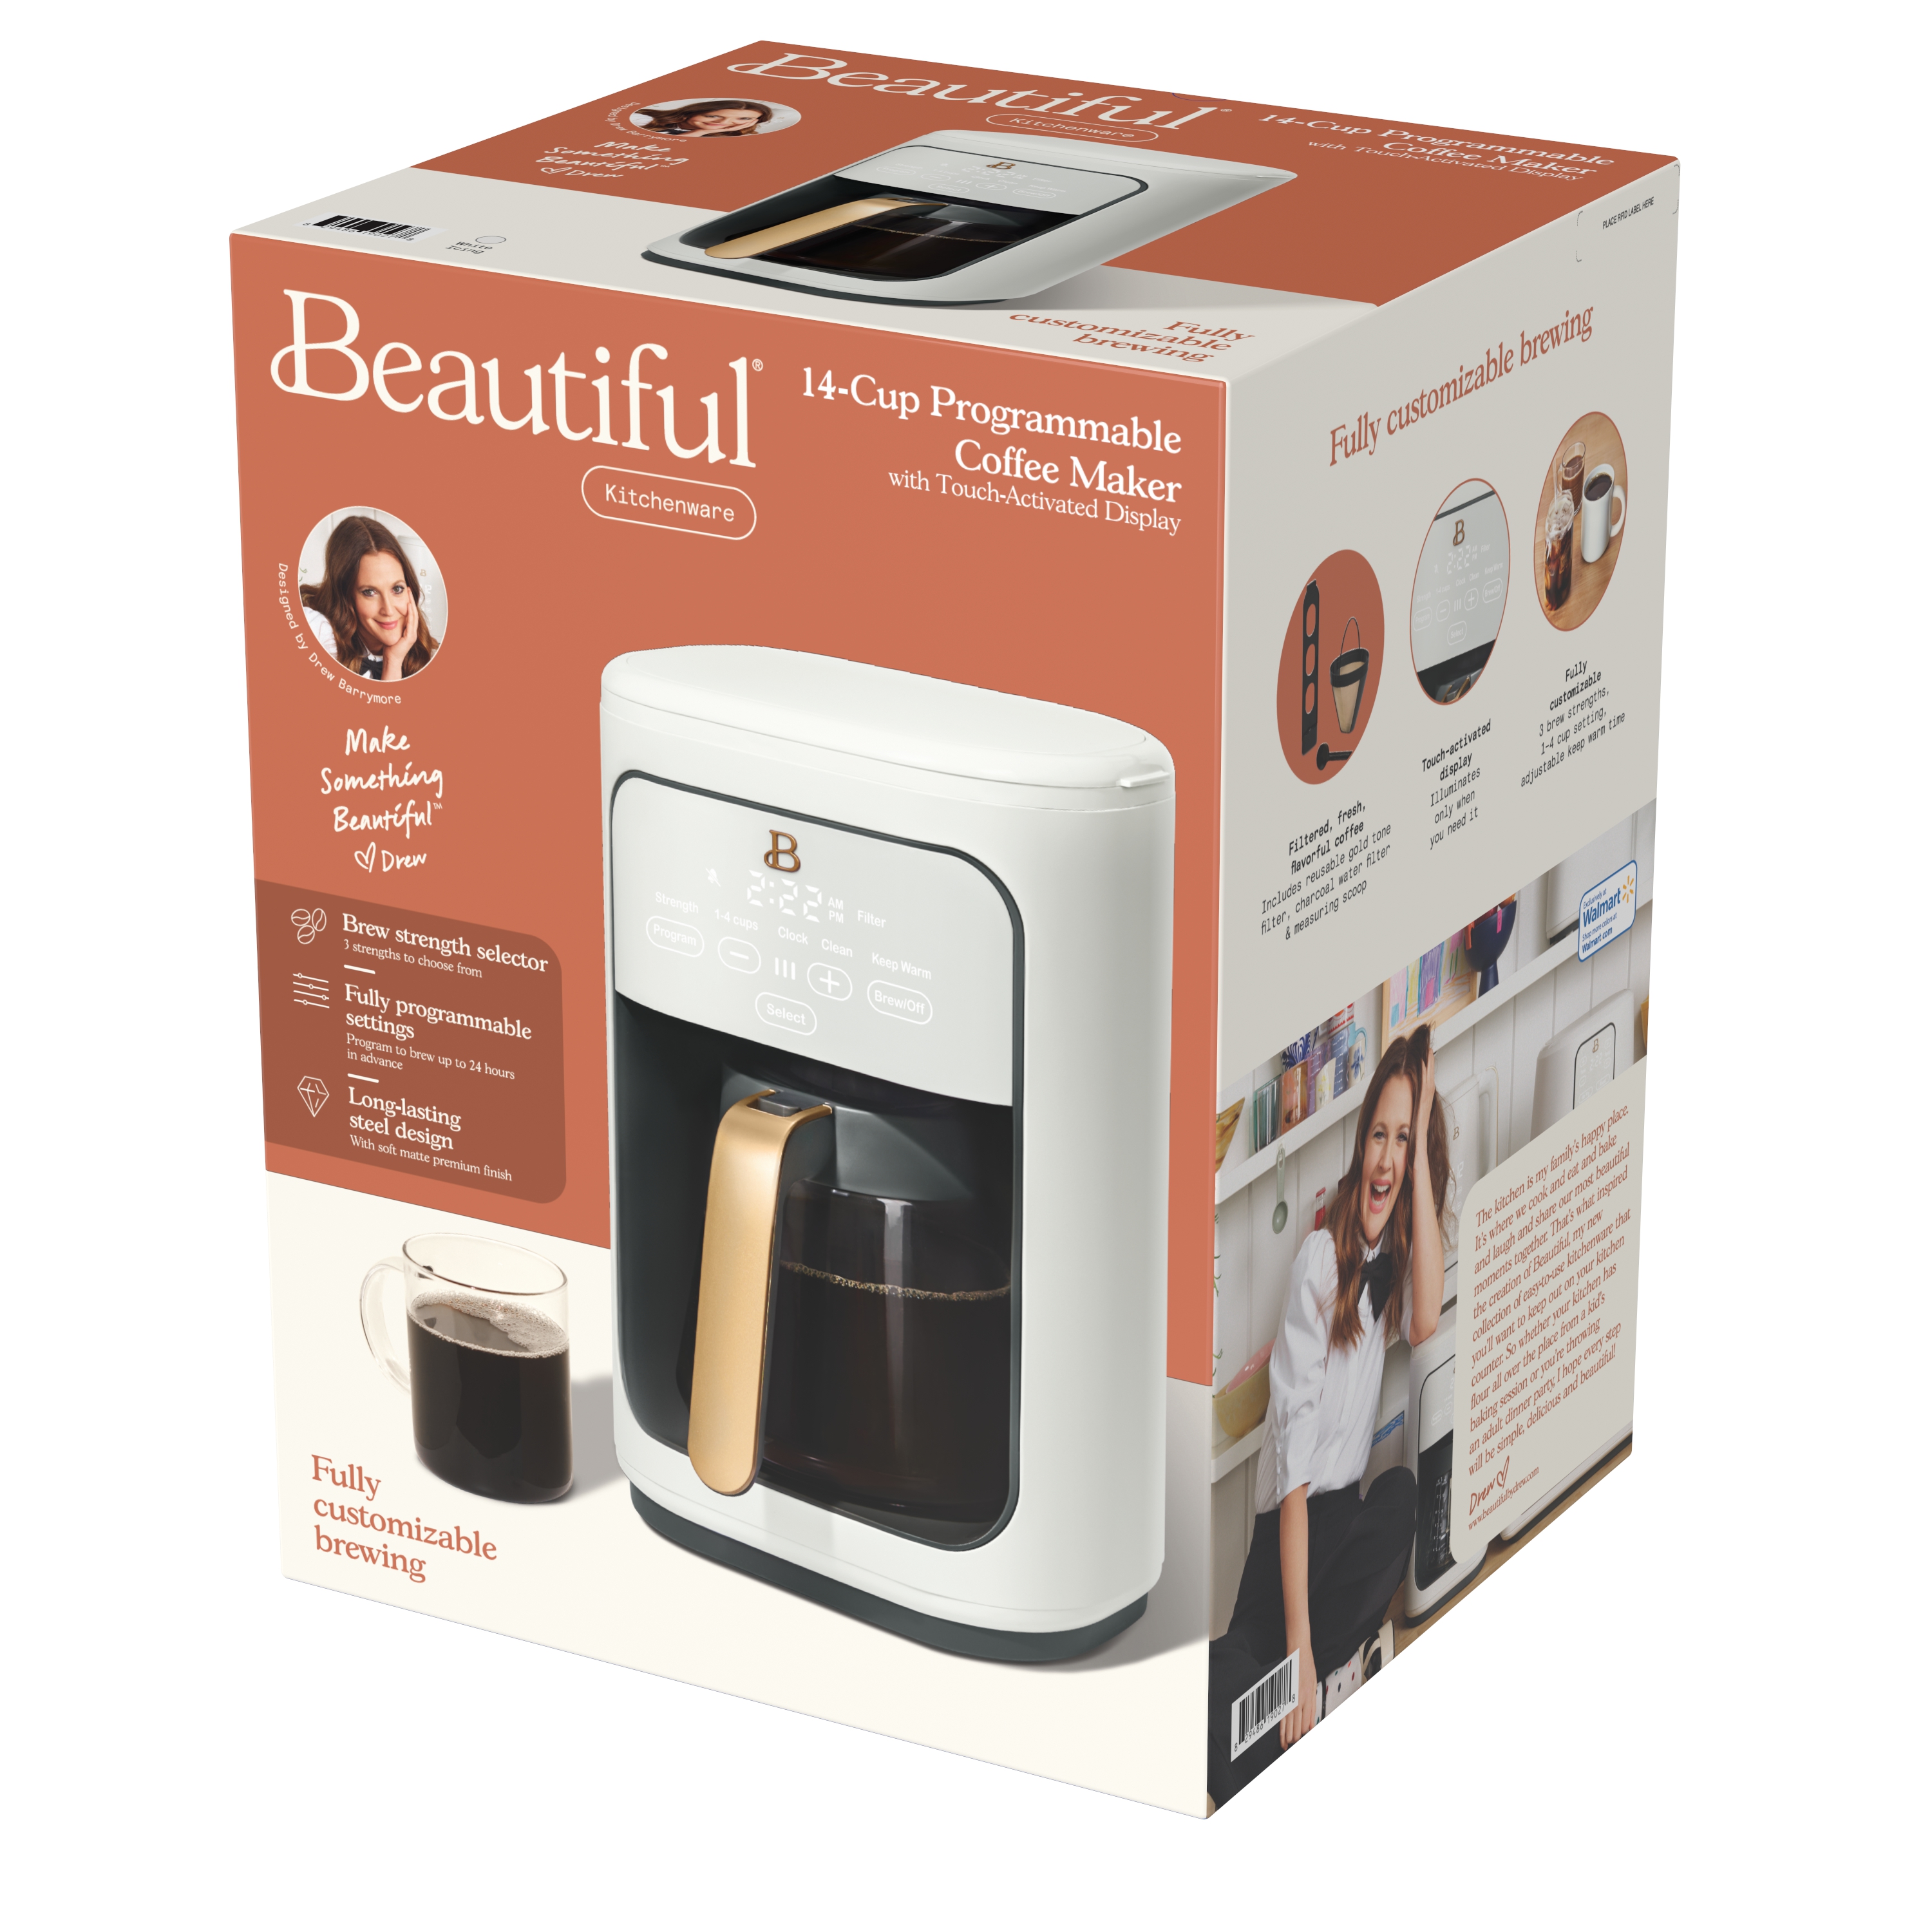 Beautiful 14-Cup Programmable Drip Coffee Maker with Touch-Activated Display, White Icing by Drew Barrymore - image 3 of 6